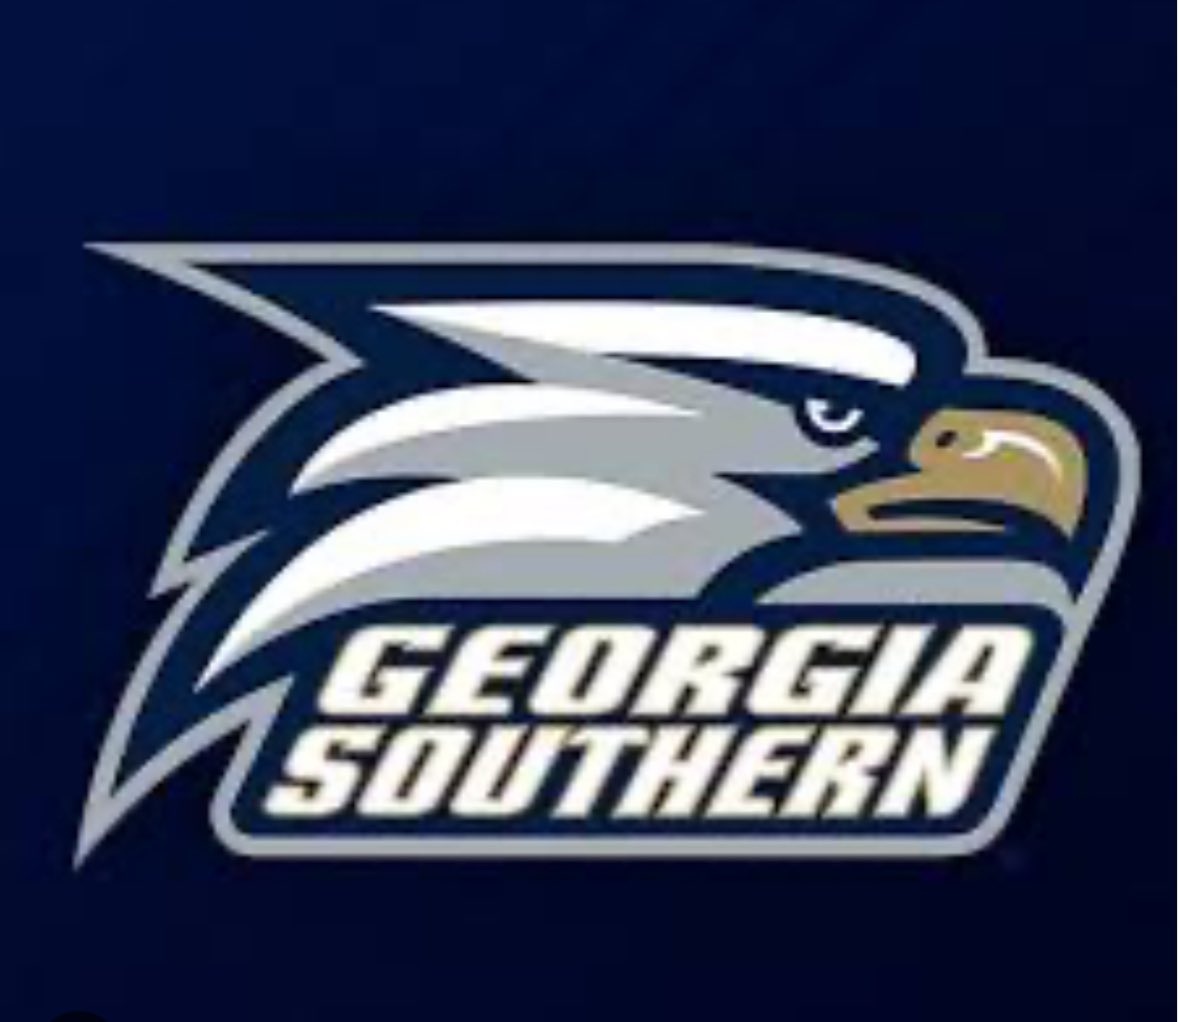 AGTG! I am blessed to receive an offer from Georgia Southern University! @CoachSafford @creeksrecruits @Rivals @CoachGodfrey_27 @ChadSimmons_ @CoachSmiley983 @deucerecruiting @RecruitGeorgia @adamgorney @TheUCReport @CoachDezWalker @PassFootball5